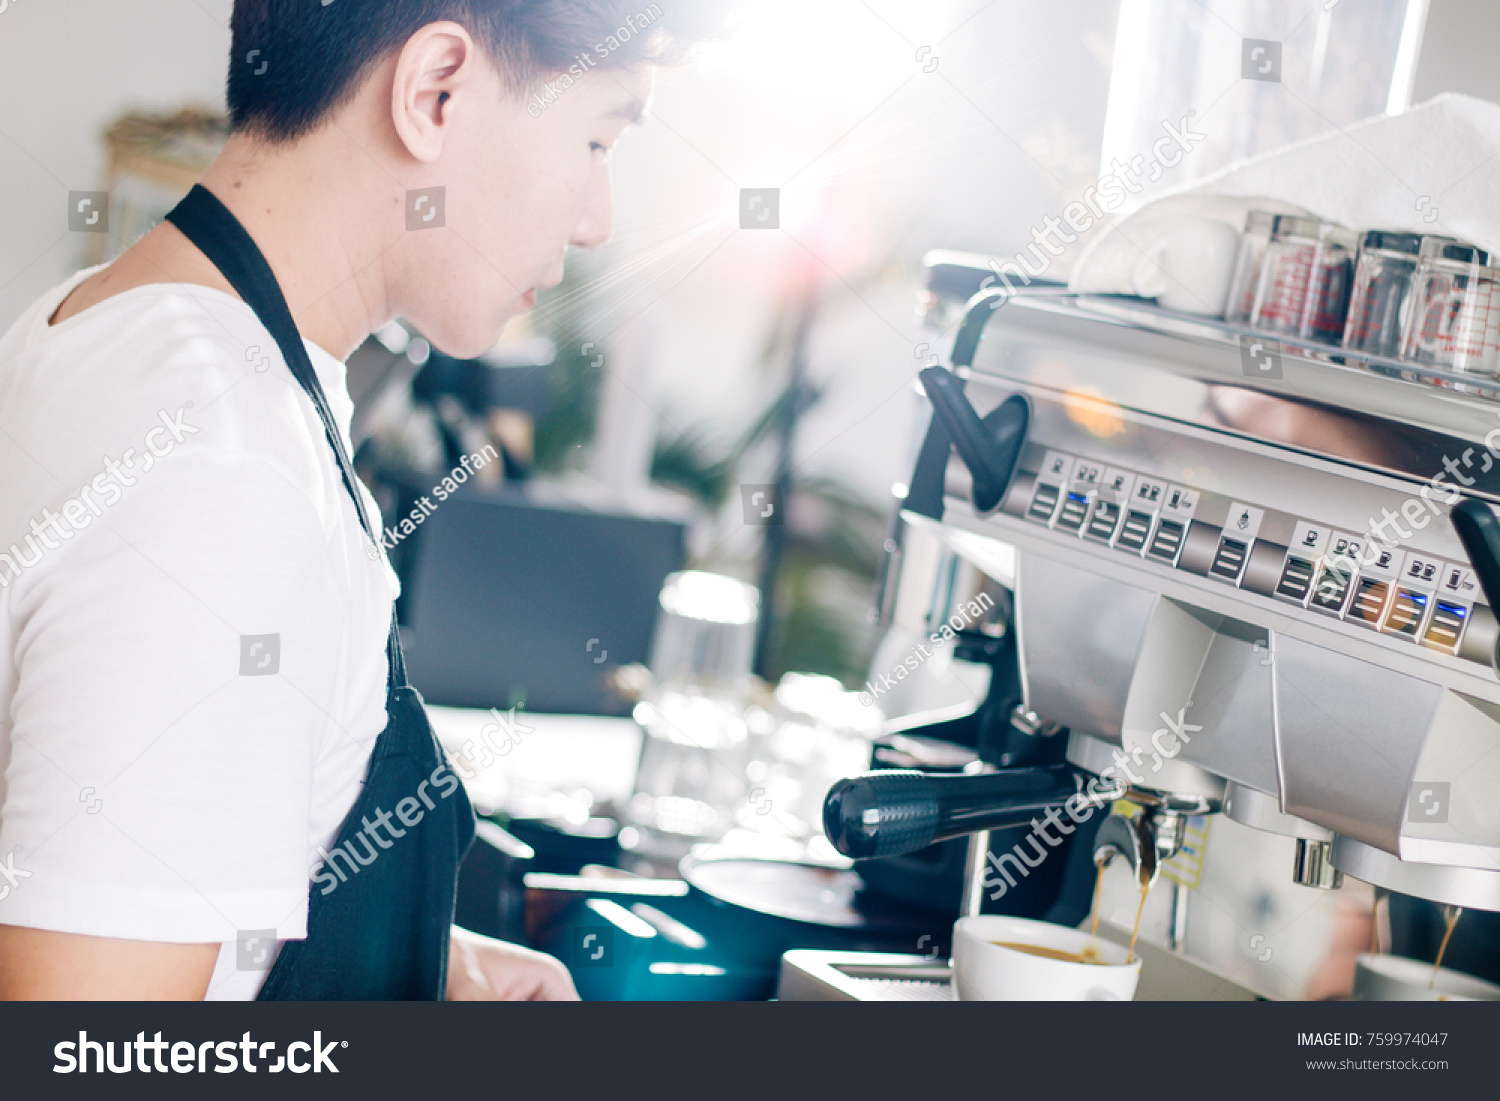 portrait  of young waiter making cup of coffee at coffee shop. #759974047